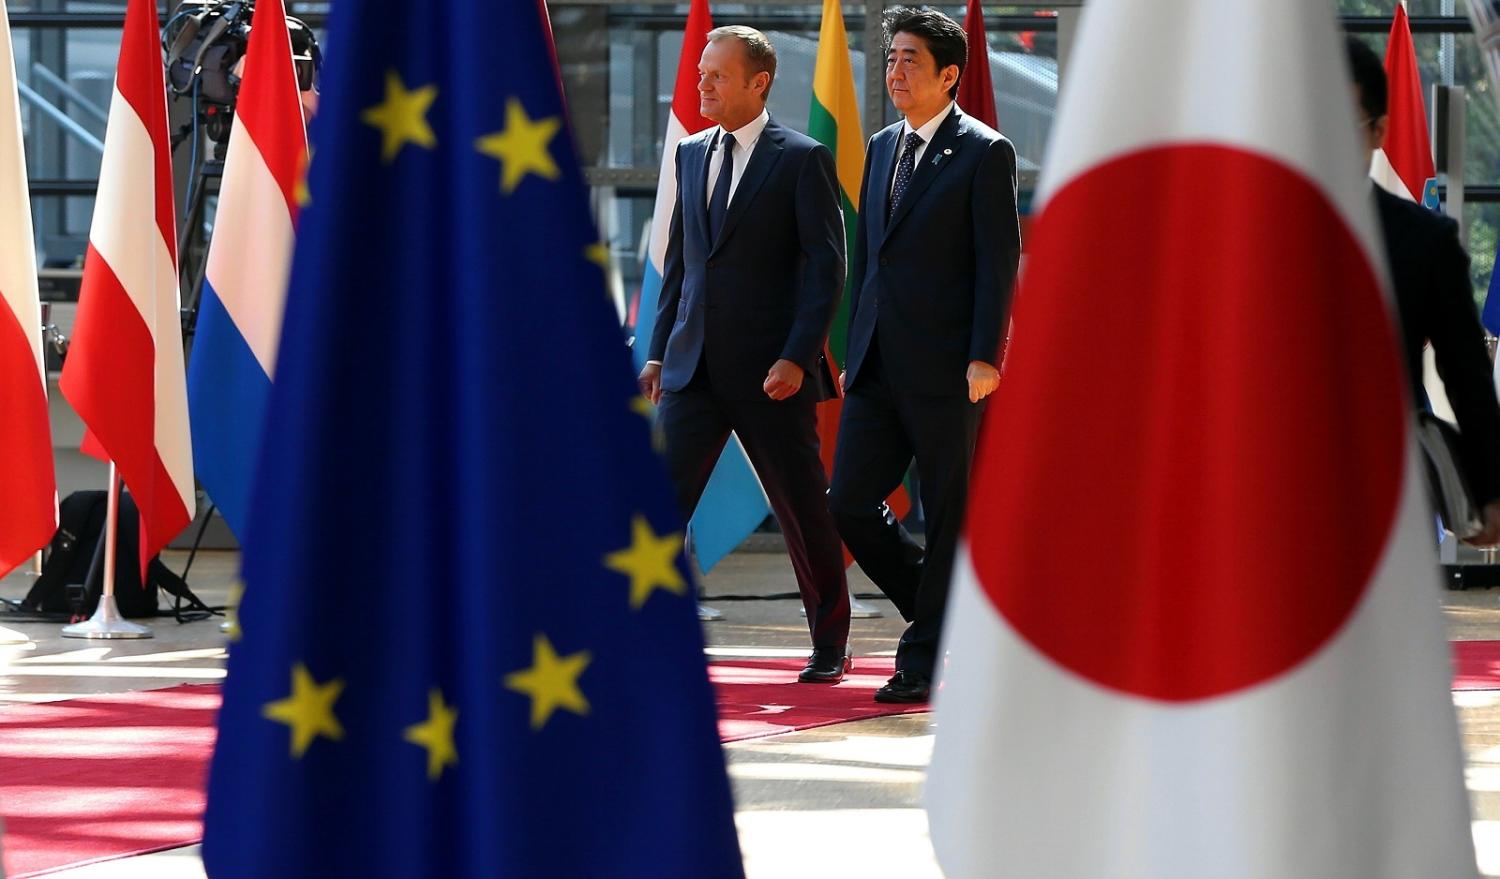 European Council President Donald Tusk and Japanese Prime Minister Shinzo Abe at the EU-Japan Summit in Brussels on 6 July (Photo: Dursun Aydemir/Getty Images)